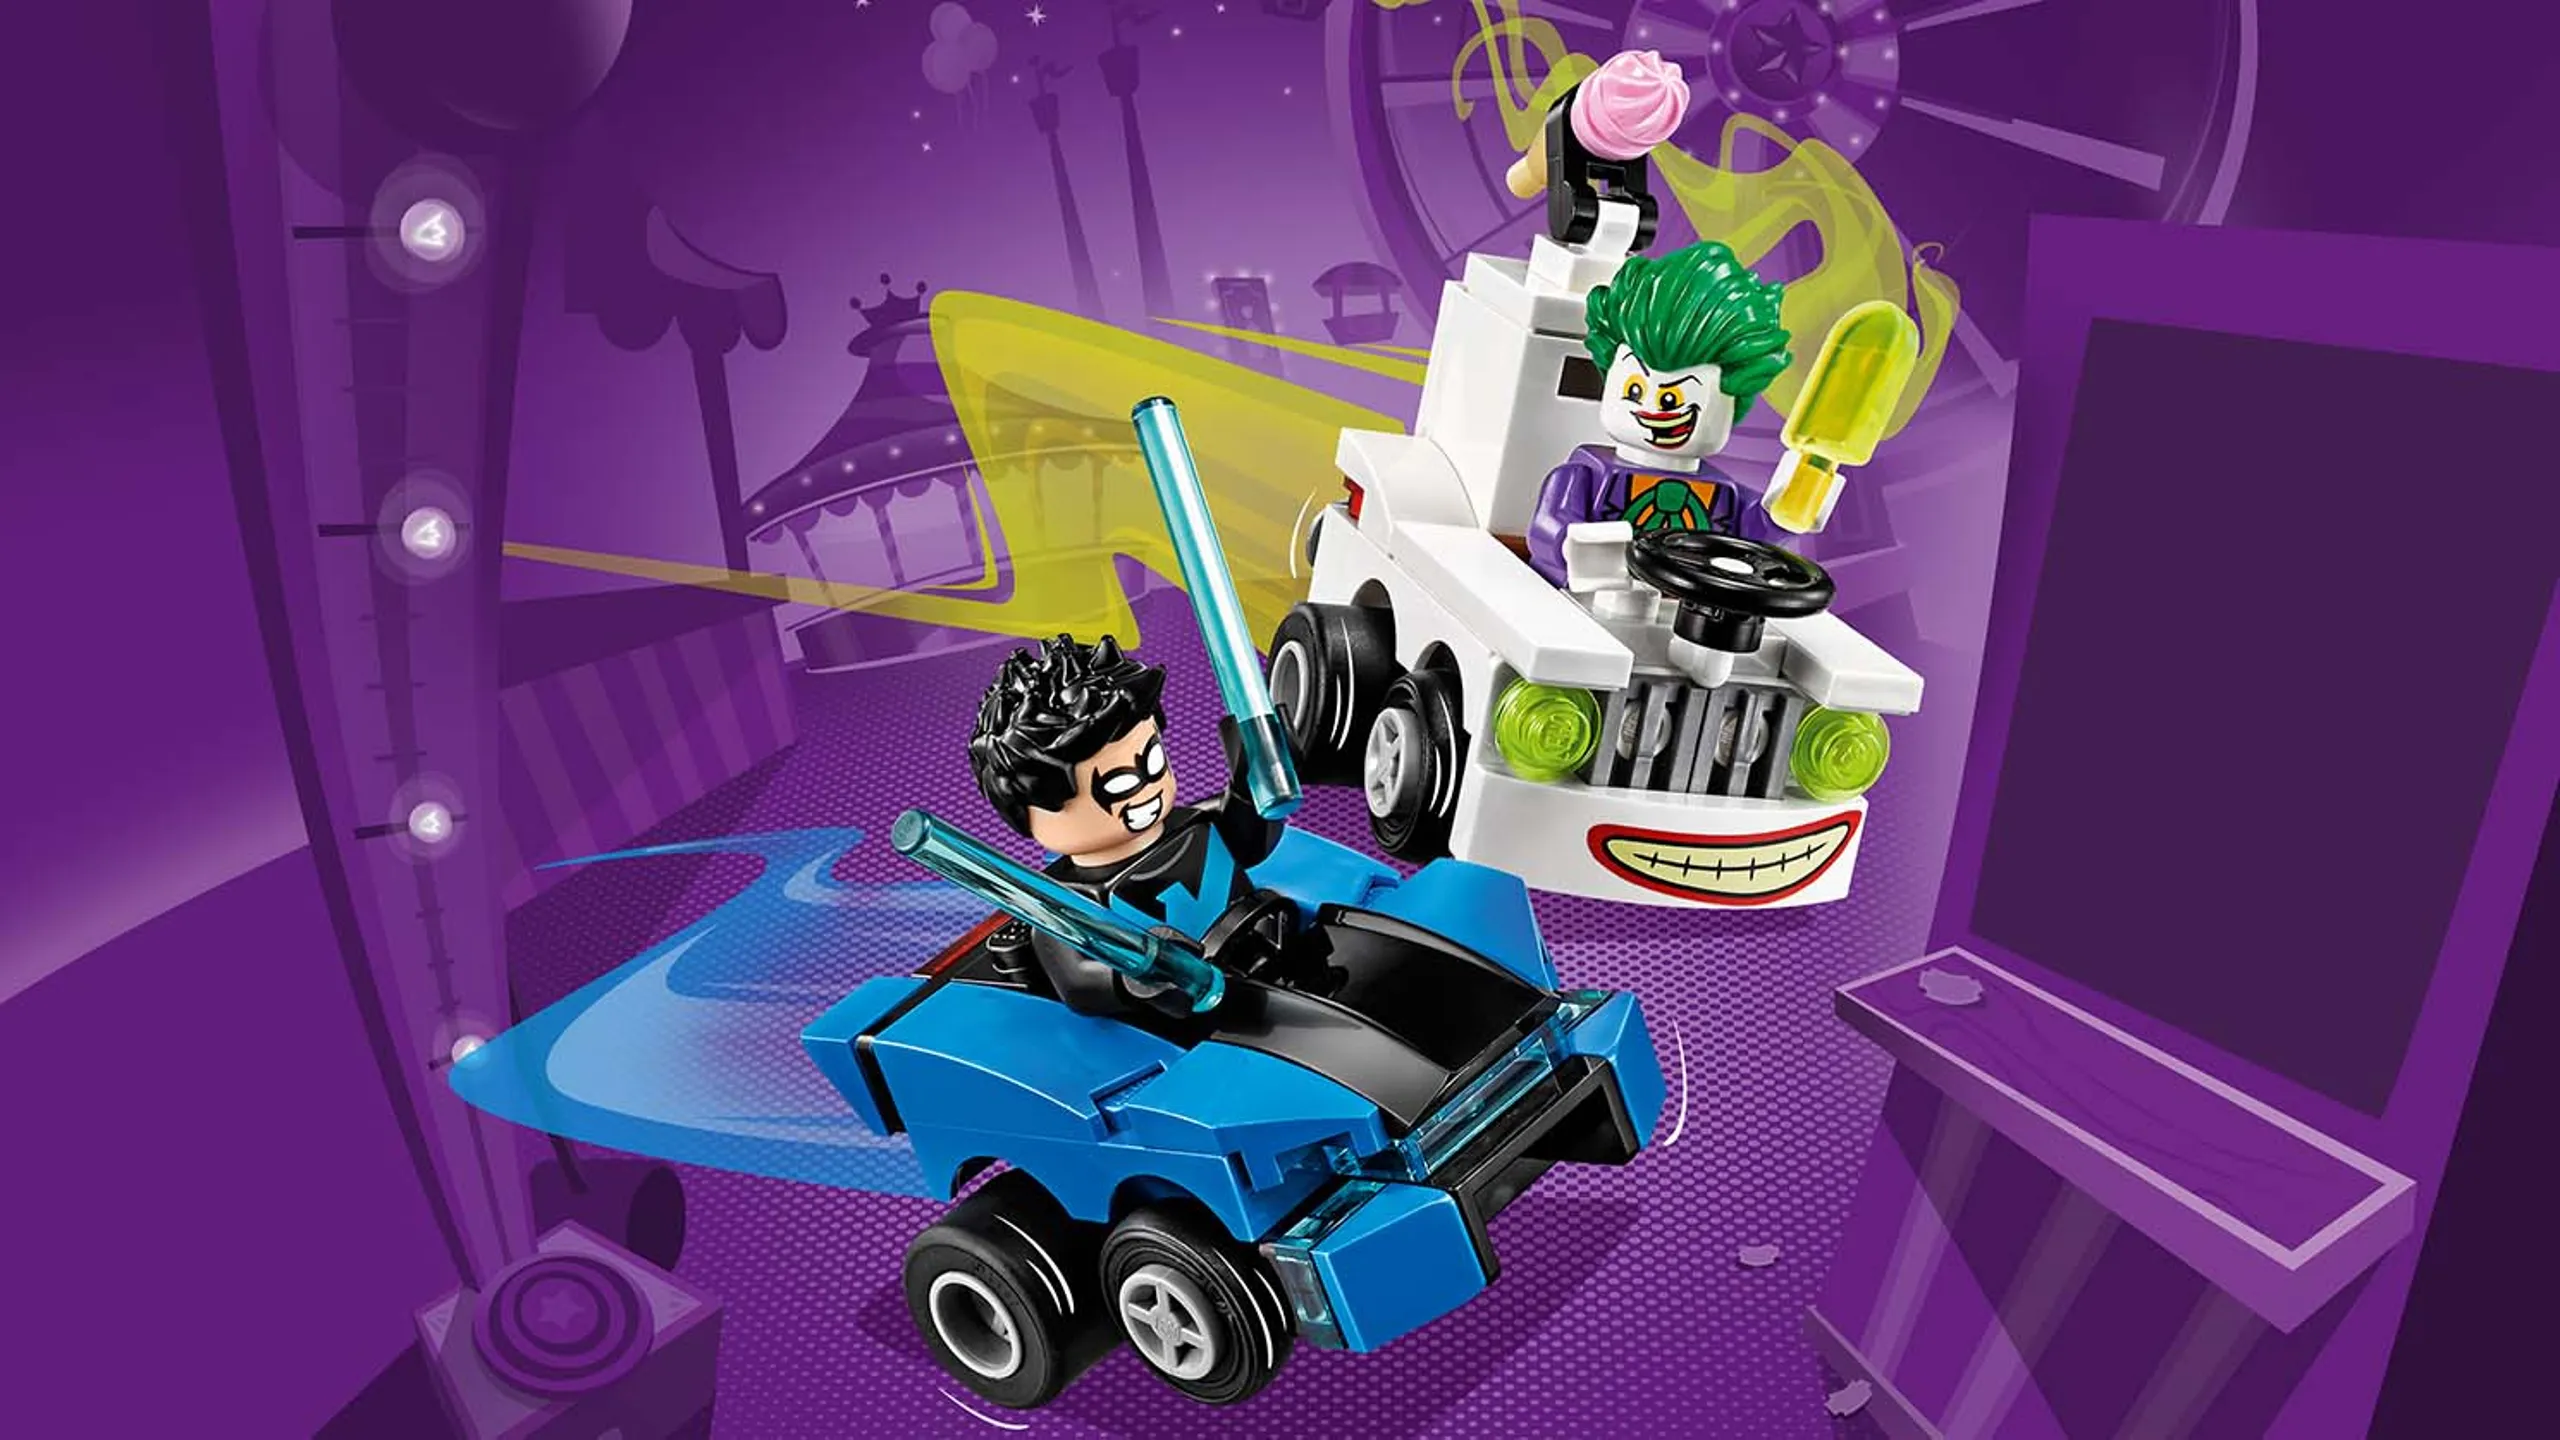 LEGO DC Super Heroes Nightwing vs. The Joker - 76093 - See the battle between Nightwing and The Joker